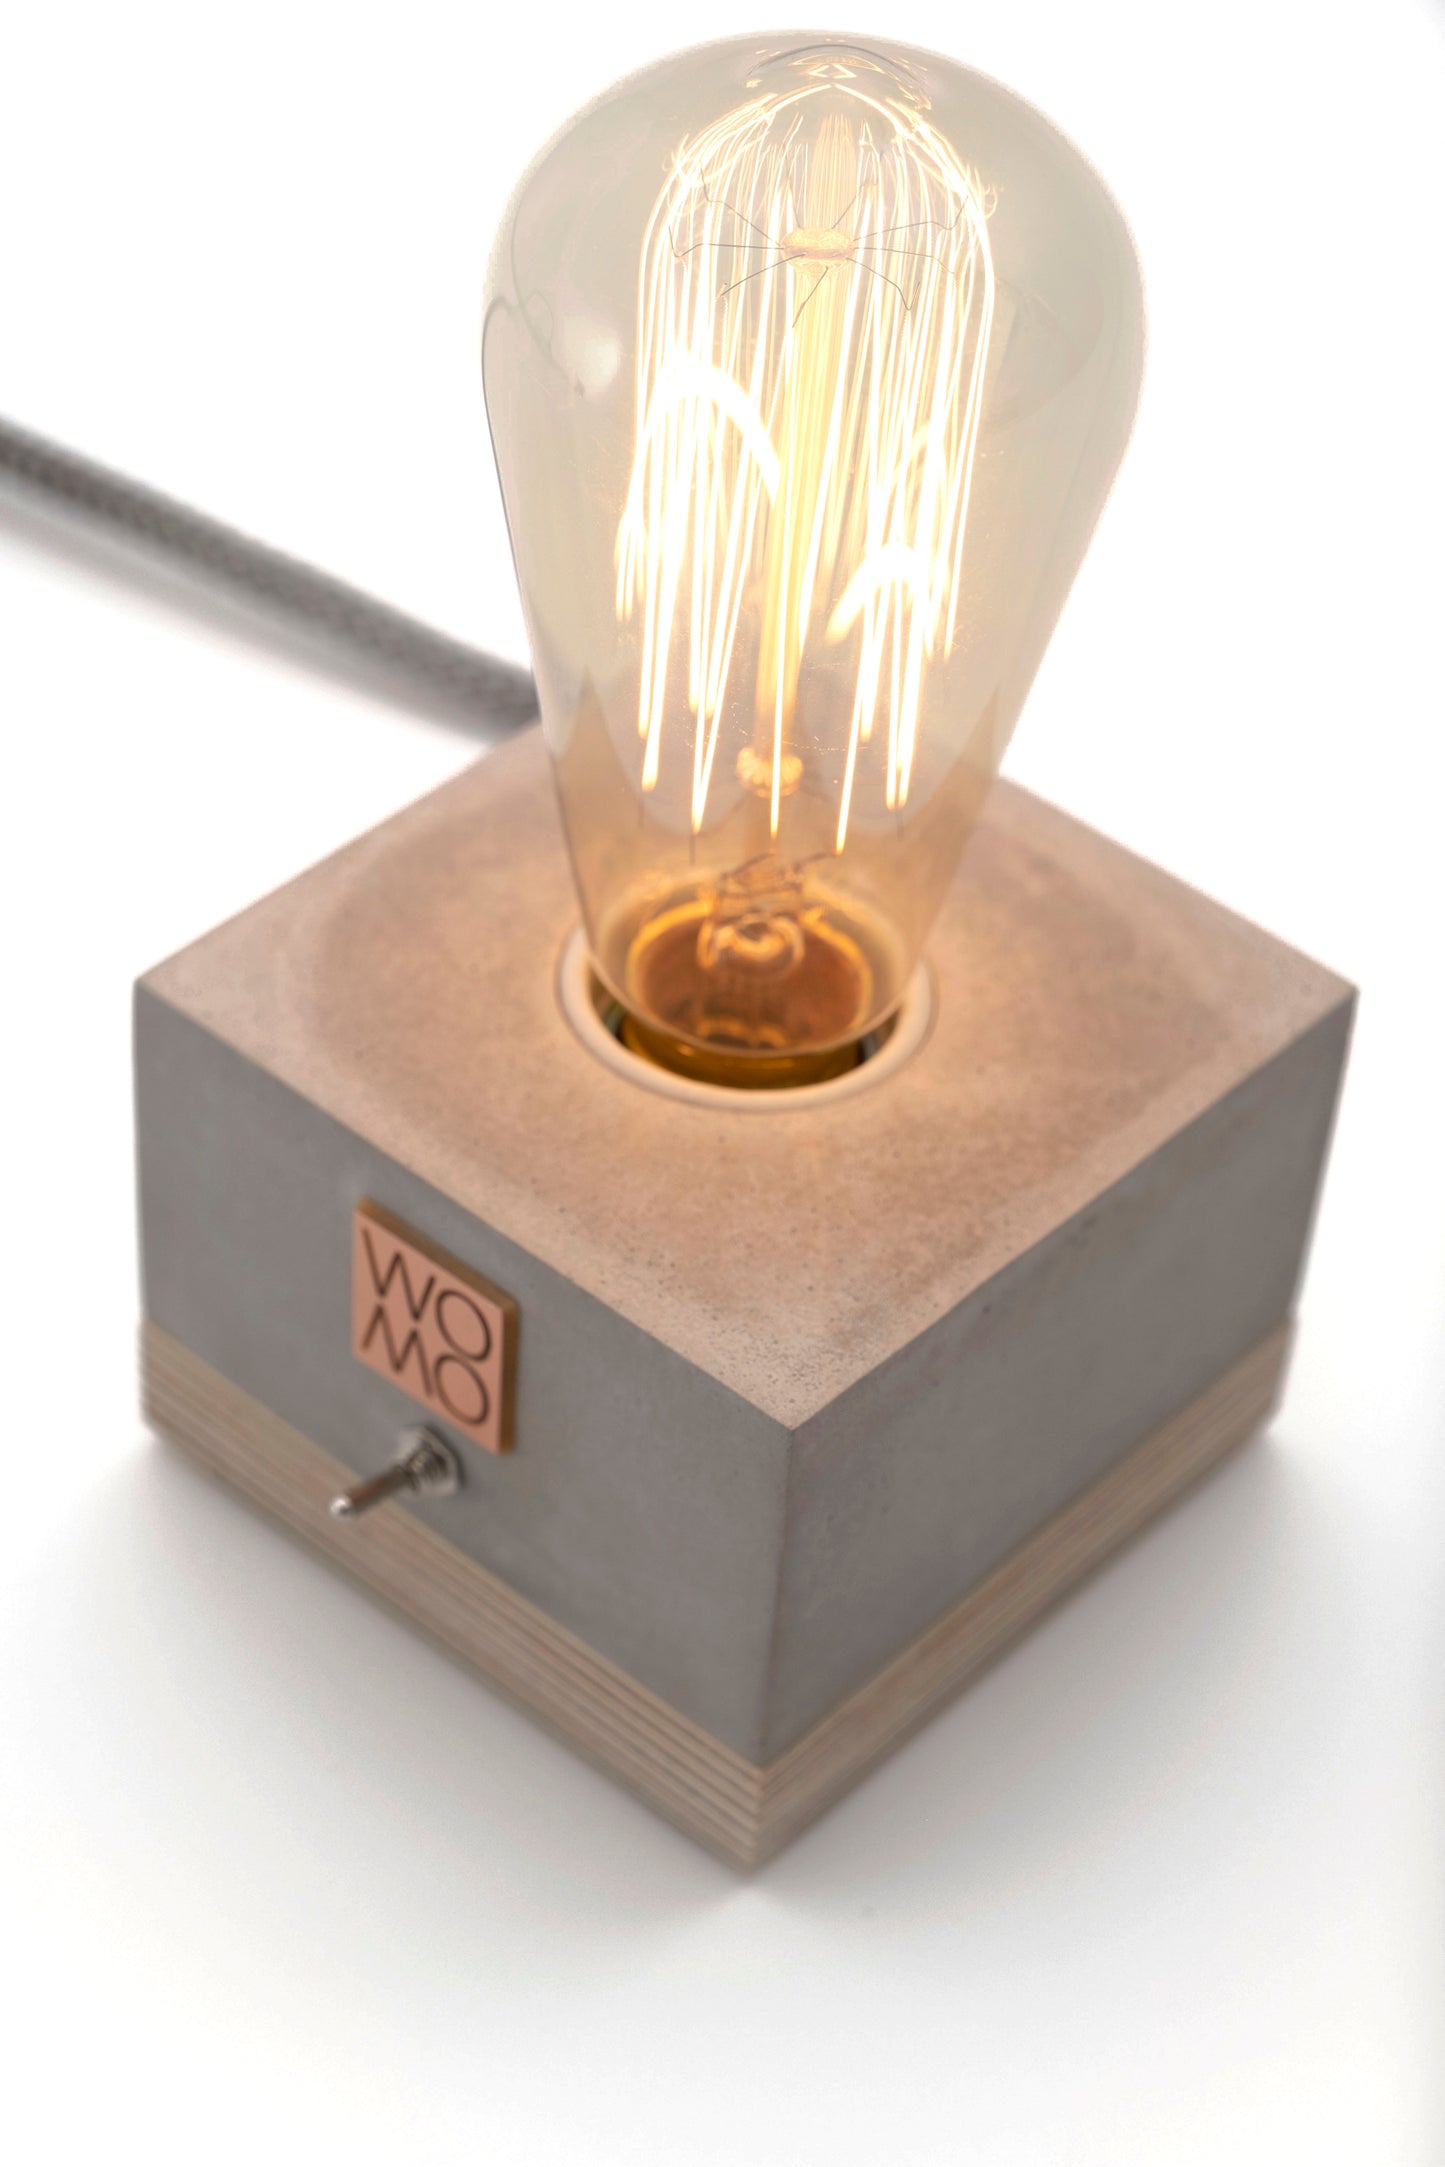 Raw Concrete Table Lamp with Toggle Switch, Modern Table Lamps